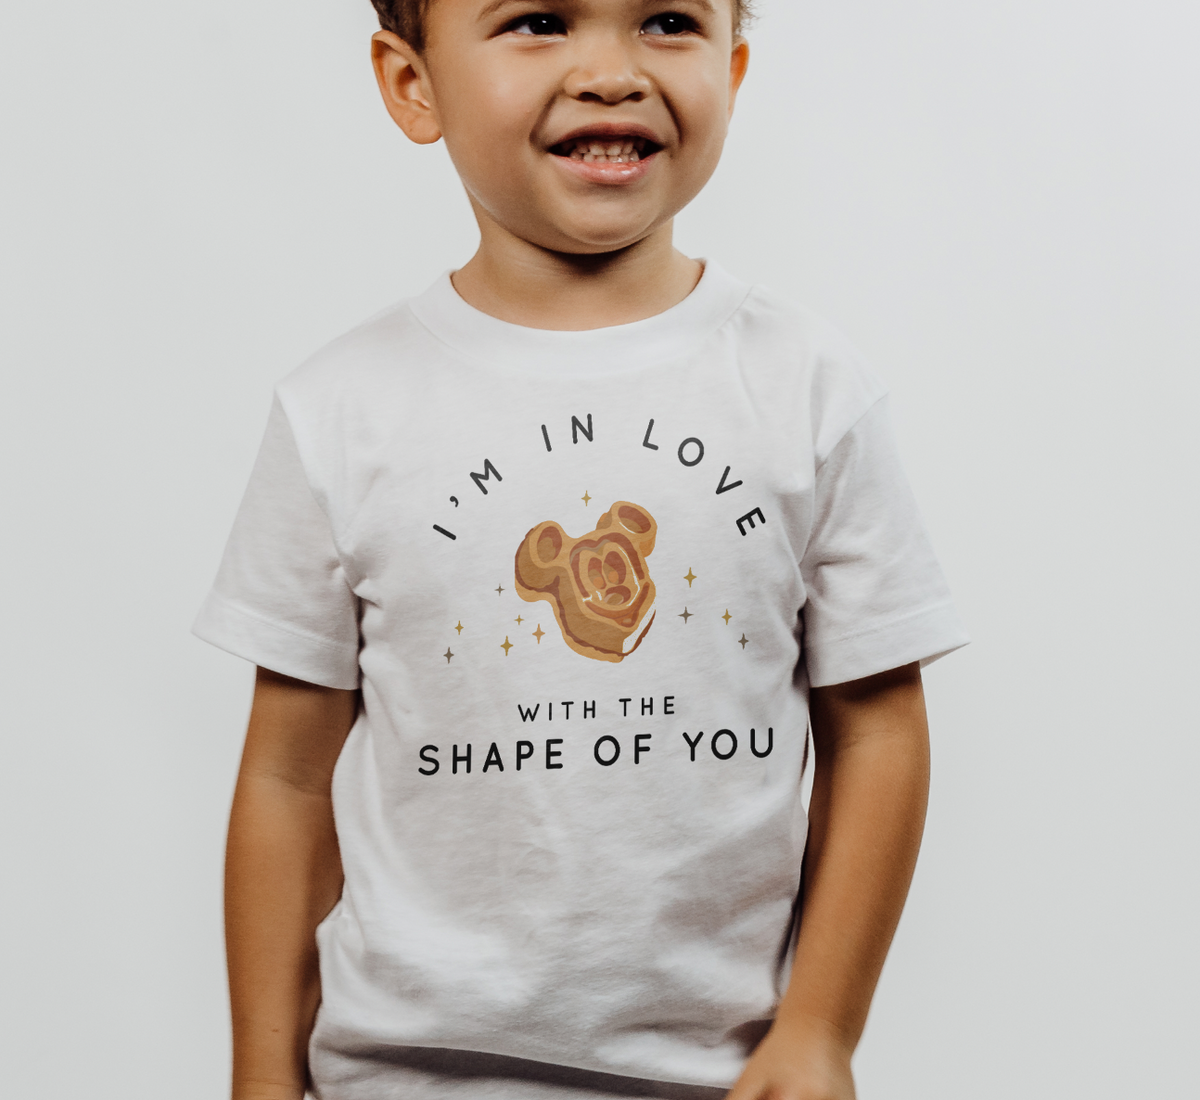 I'm in Love with the Shape of You Bella Canvas Toddler Short Sleeve Tee